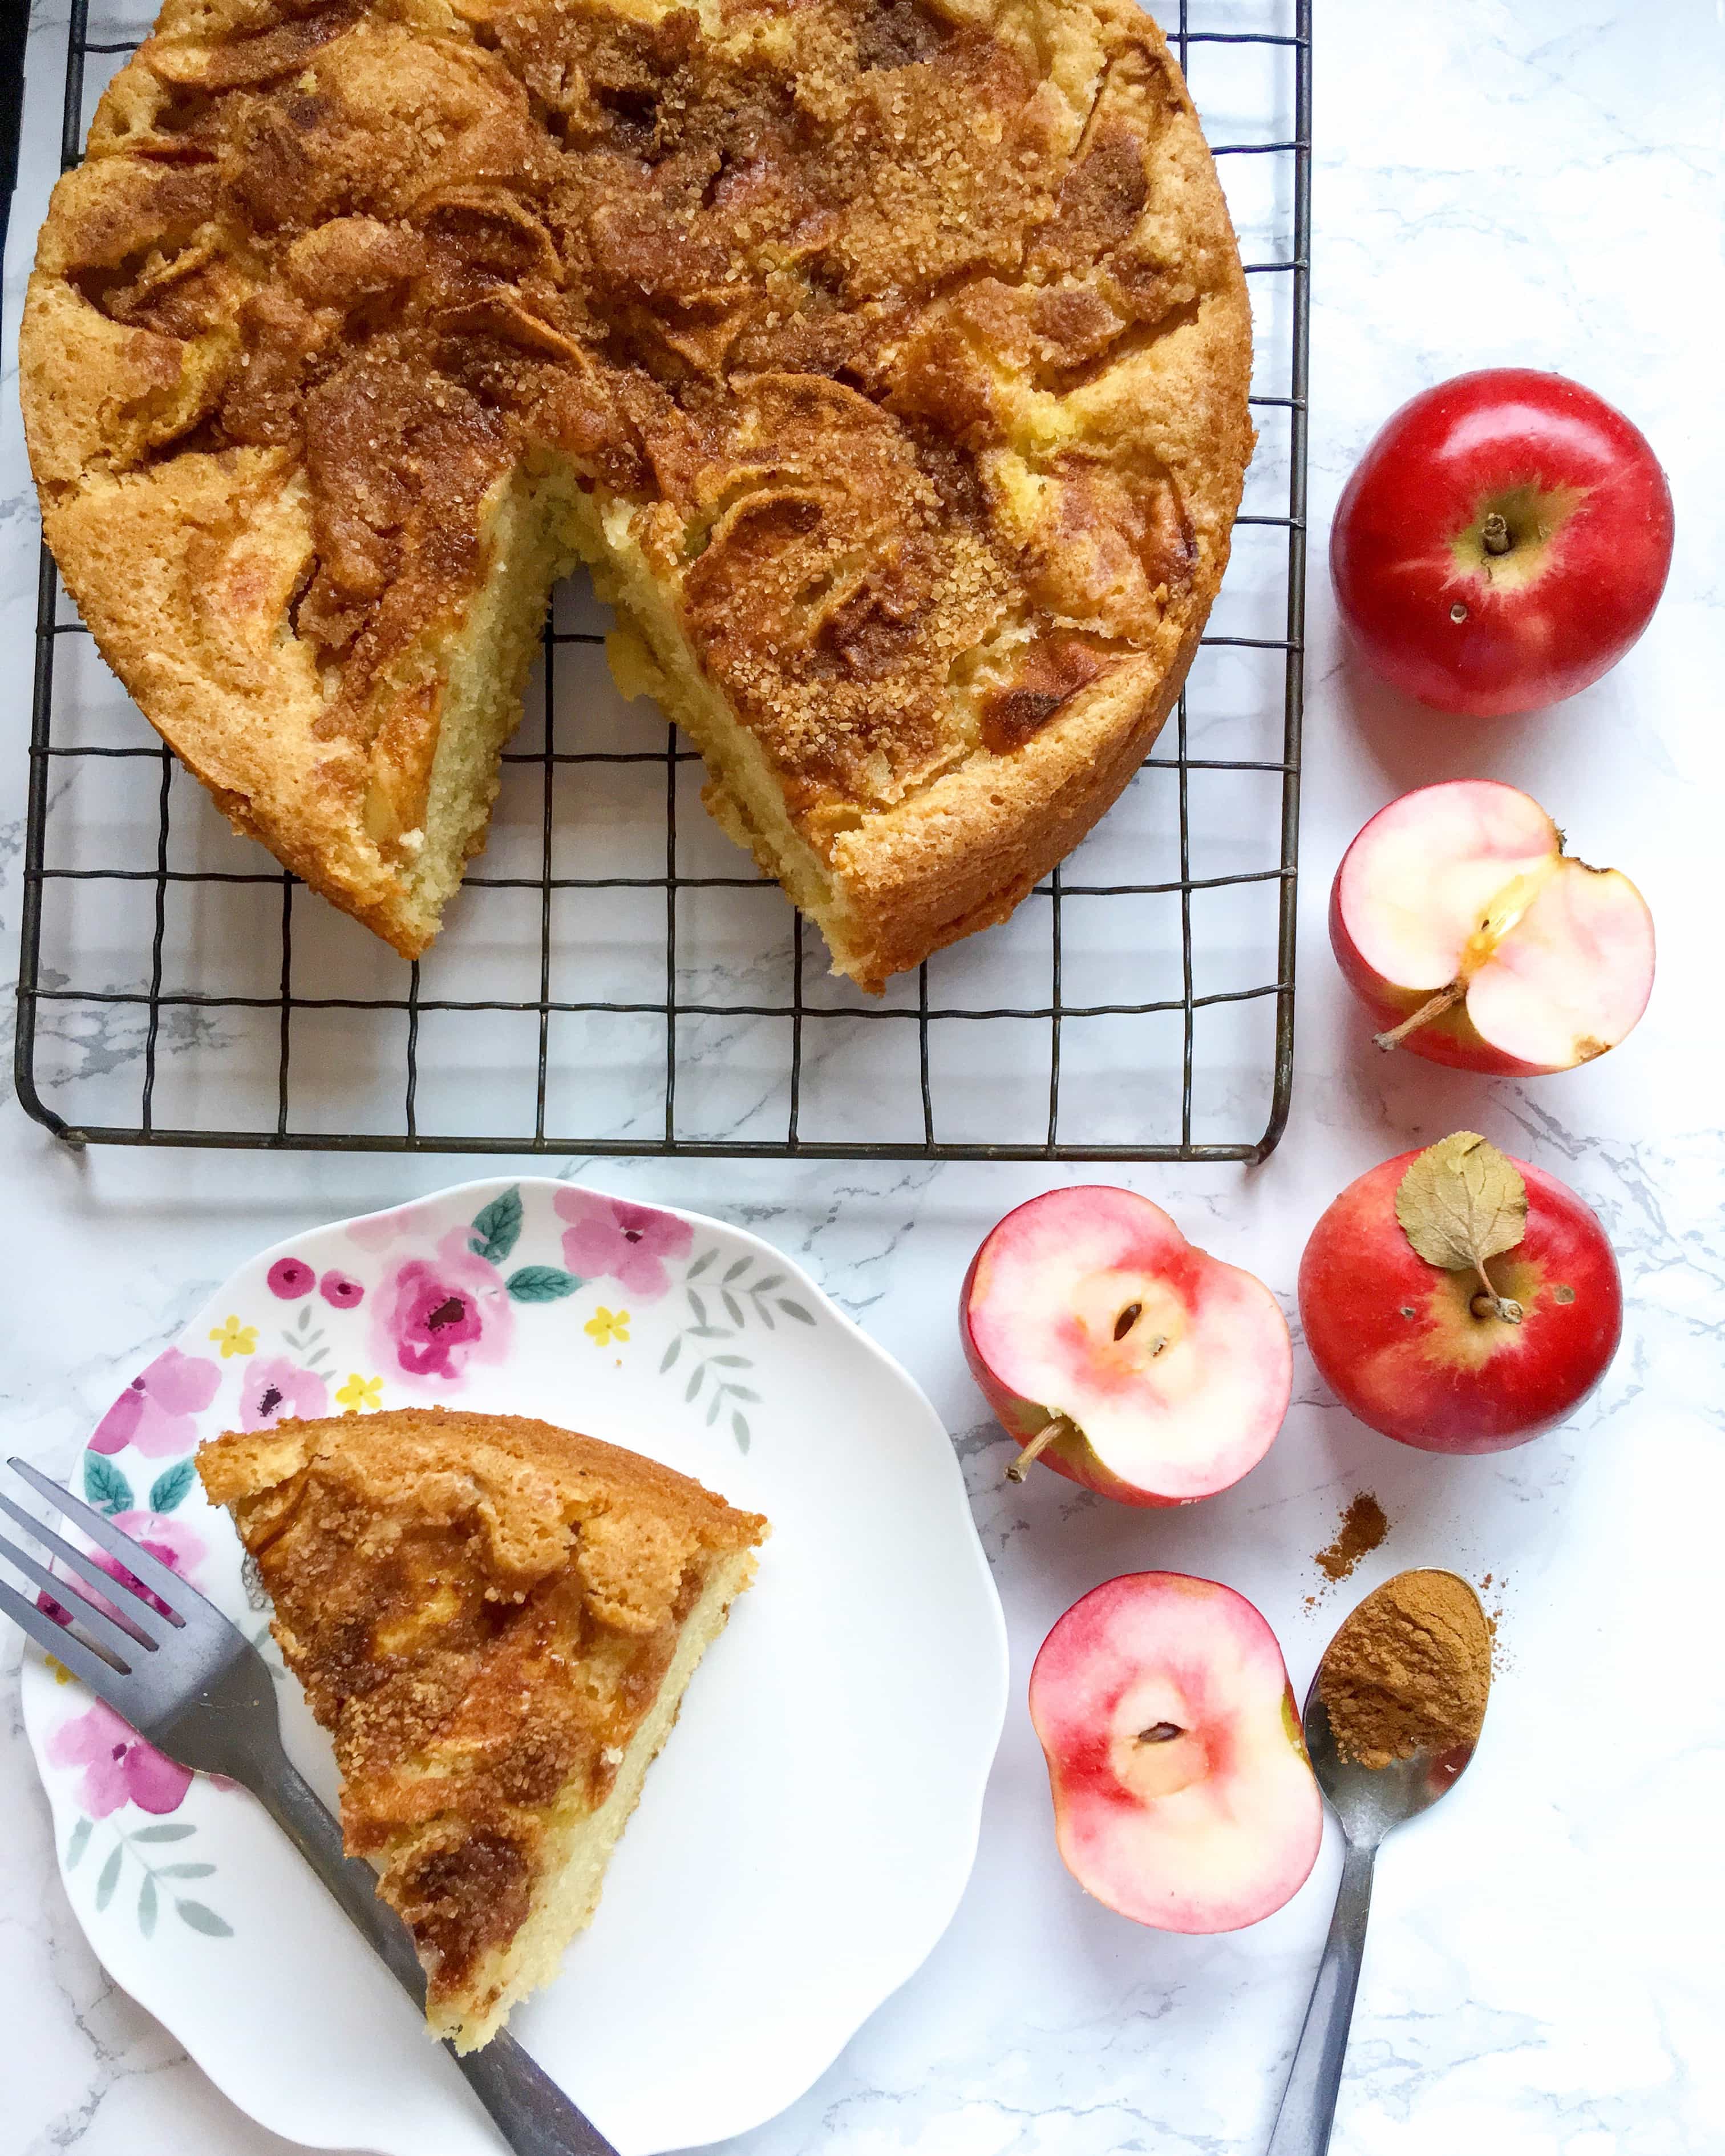 an apple cake topped with crunchy demerara sugar on a silver wire rack and a pretty floral plate with a slice of the cake and a fork. Pink fleshed apples are sitting around the cake along with a spoon of cinnamon.